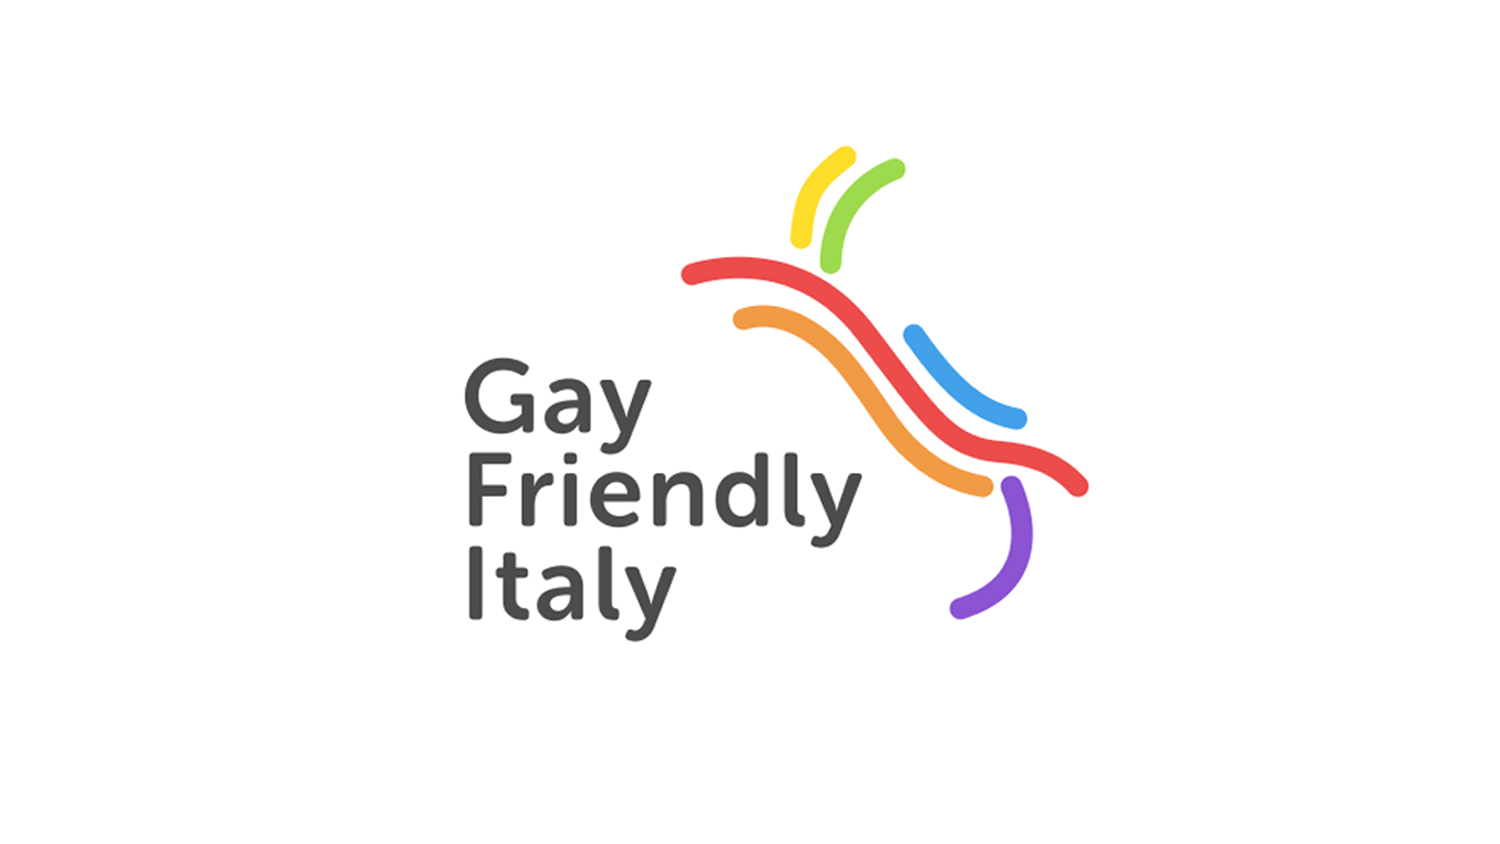 https://gnetwork360.com/2023/madrid/wp-content/uploads/2022/08/SPONSORS-G360-MAD-2022-GAY-FRIENDLY-ITALY.jpg